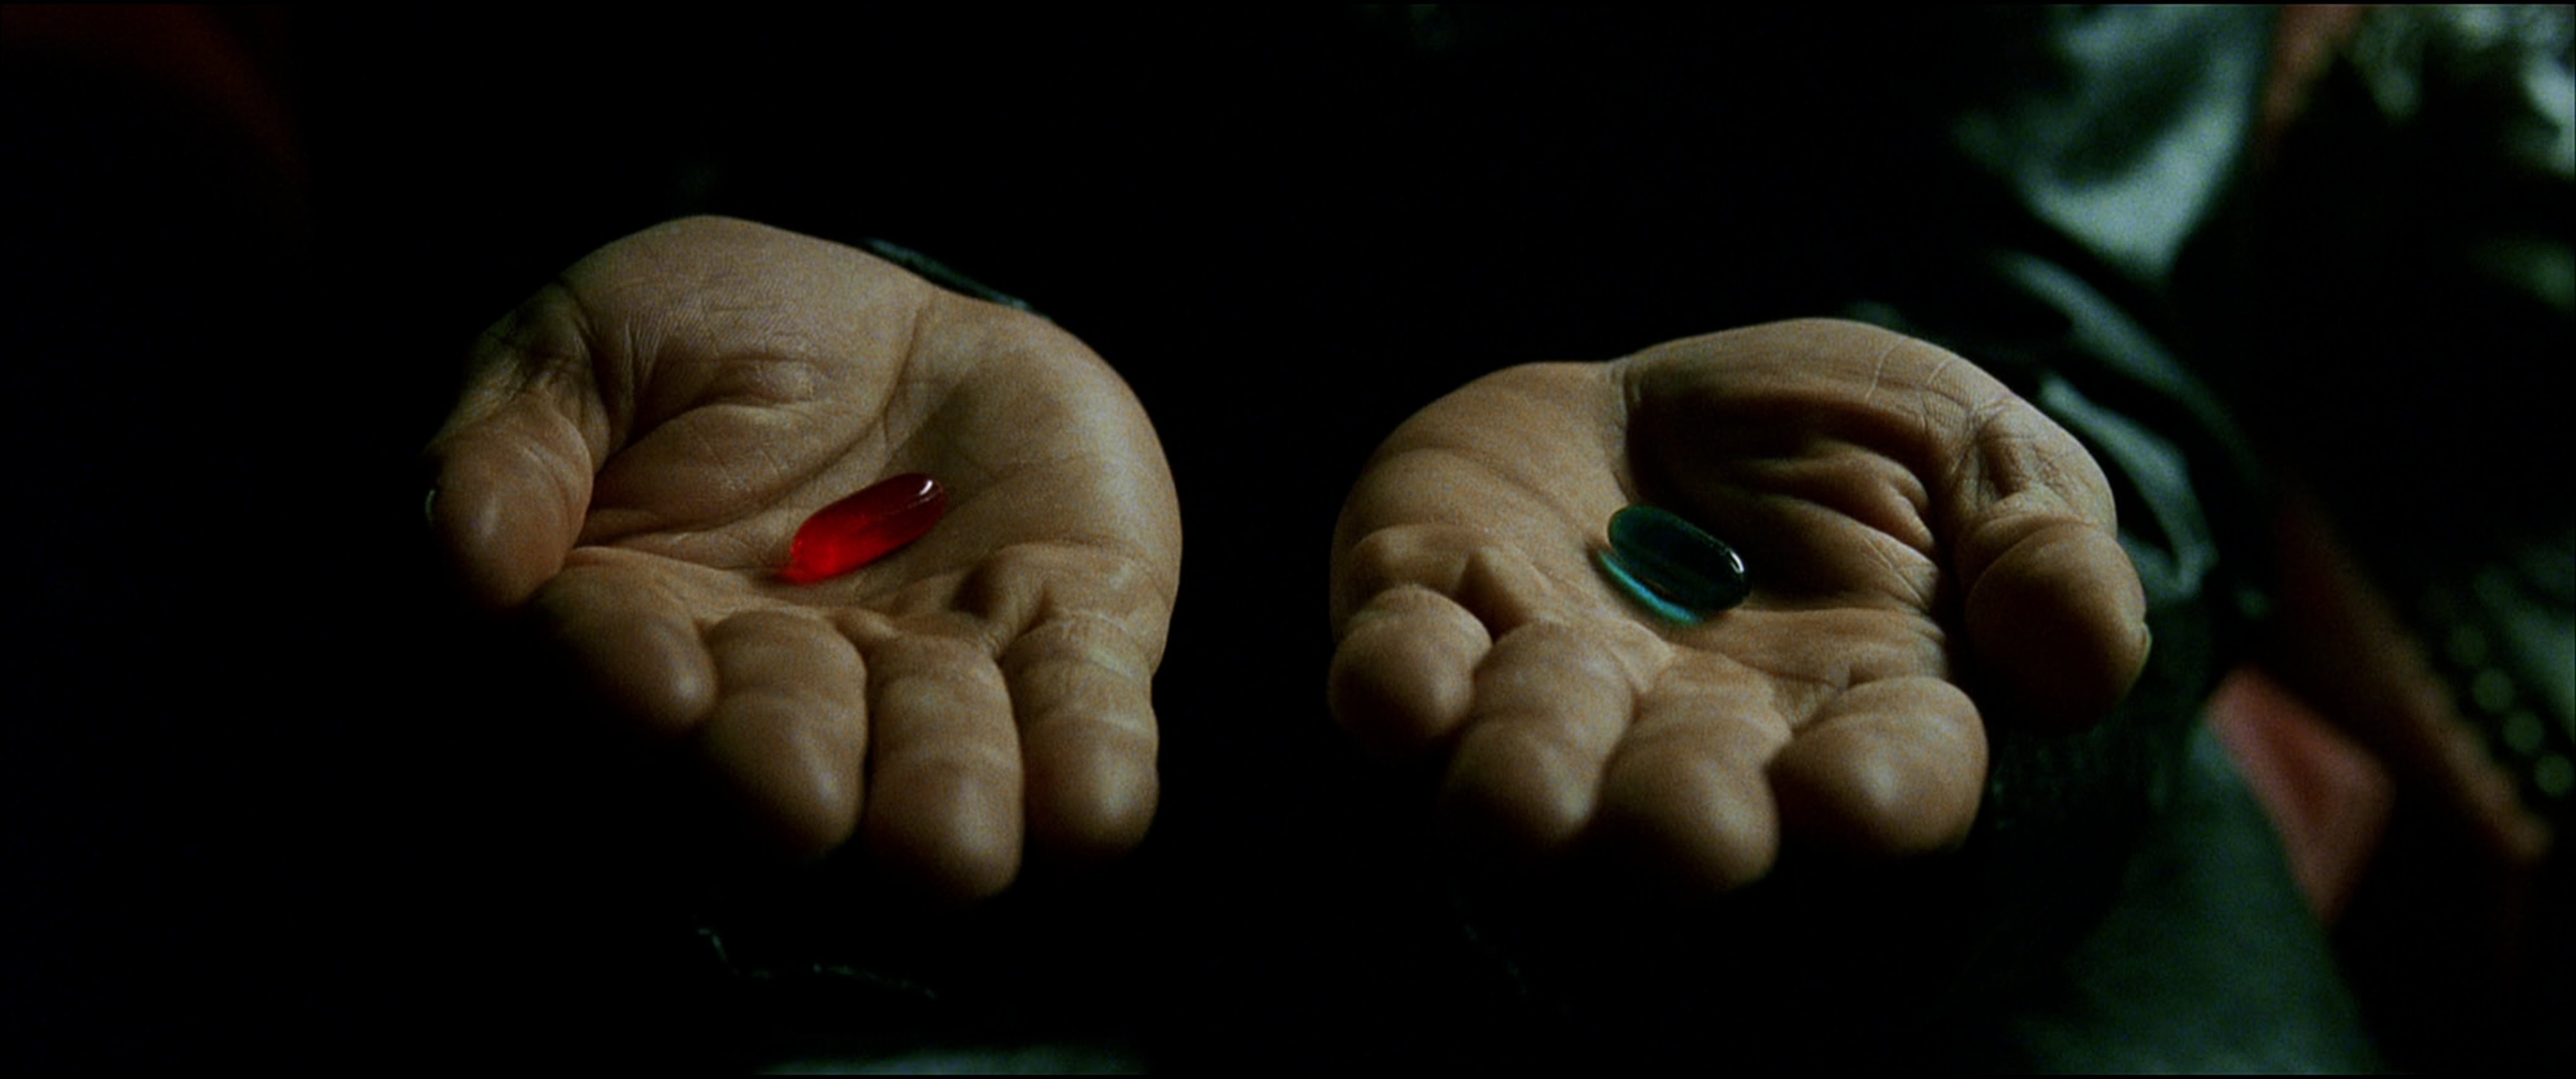 Netflix Tudum on Twitter: then there's the whole red pill, blue pill connection. Not only is the pill literally Neo's gateway to seeing the world as it is and the systems